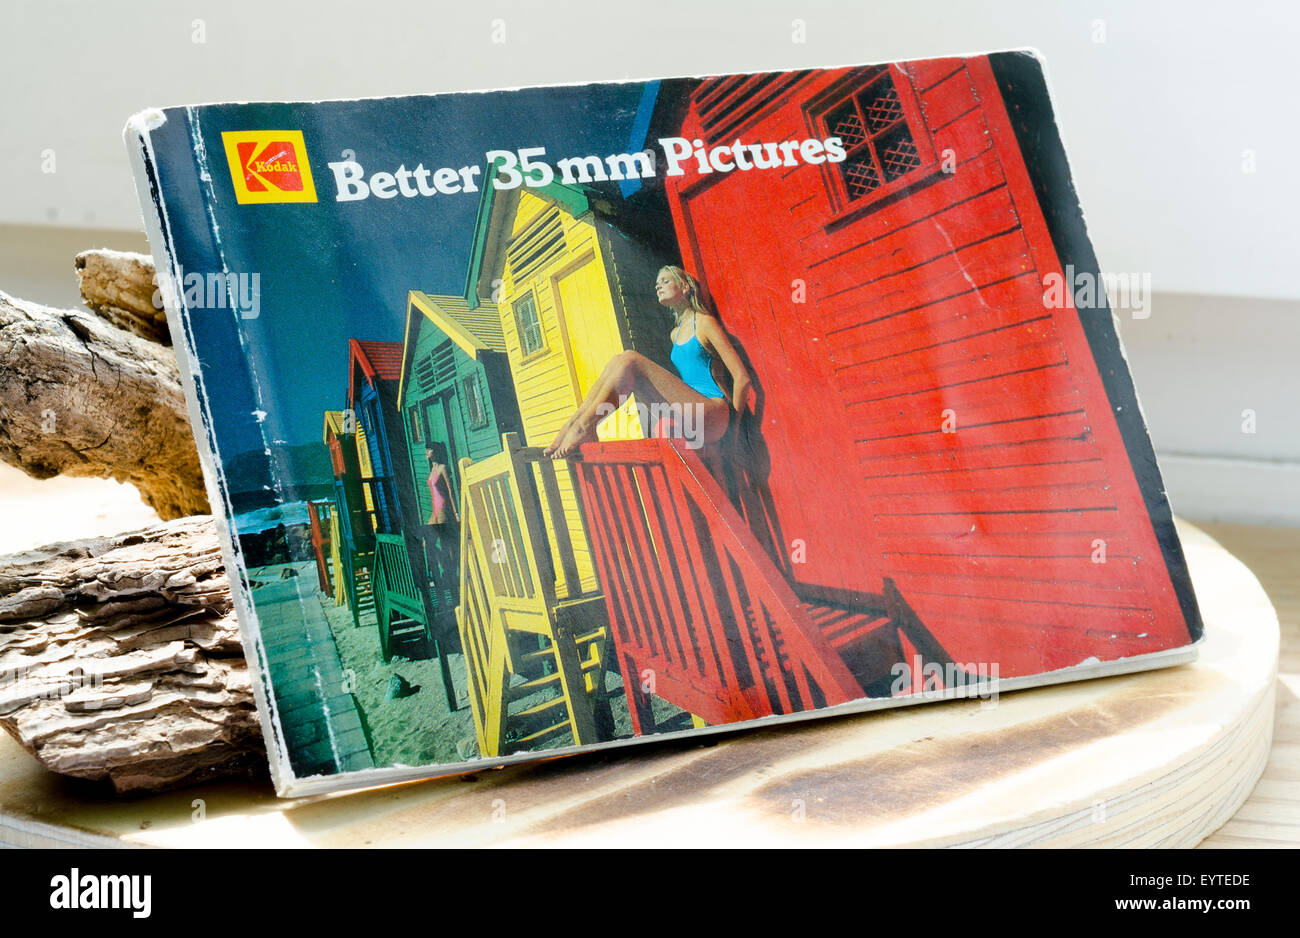 Kodak Better 35 mm Pictures Photography Book from 1983 Stock Photo